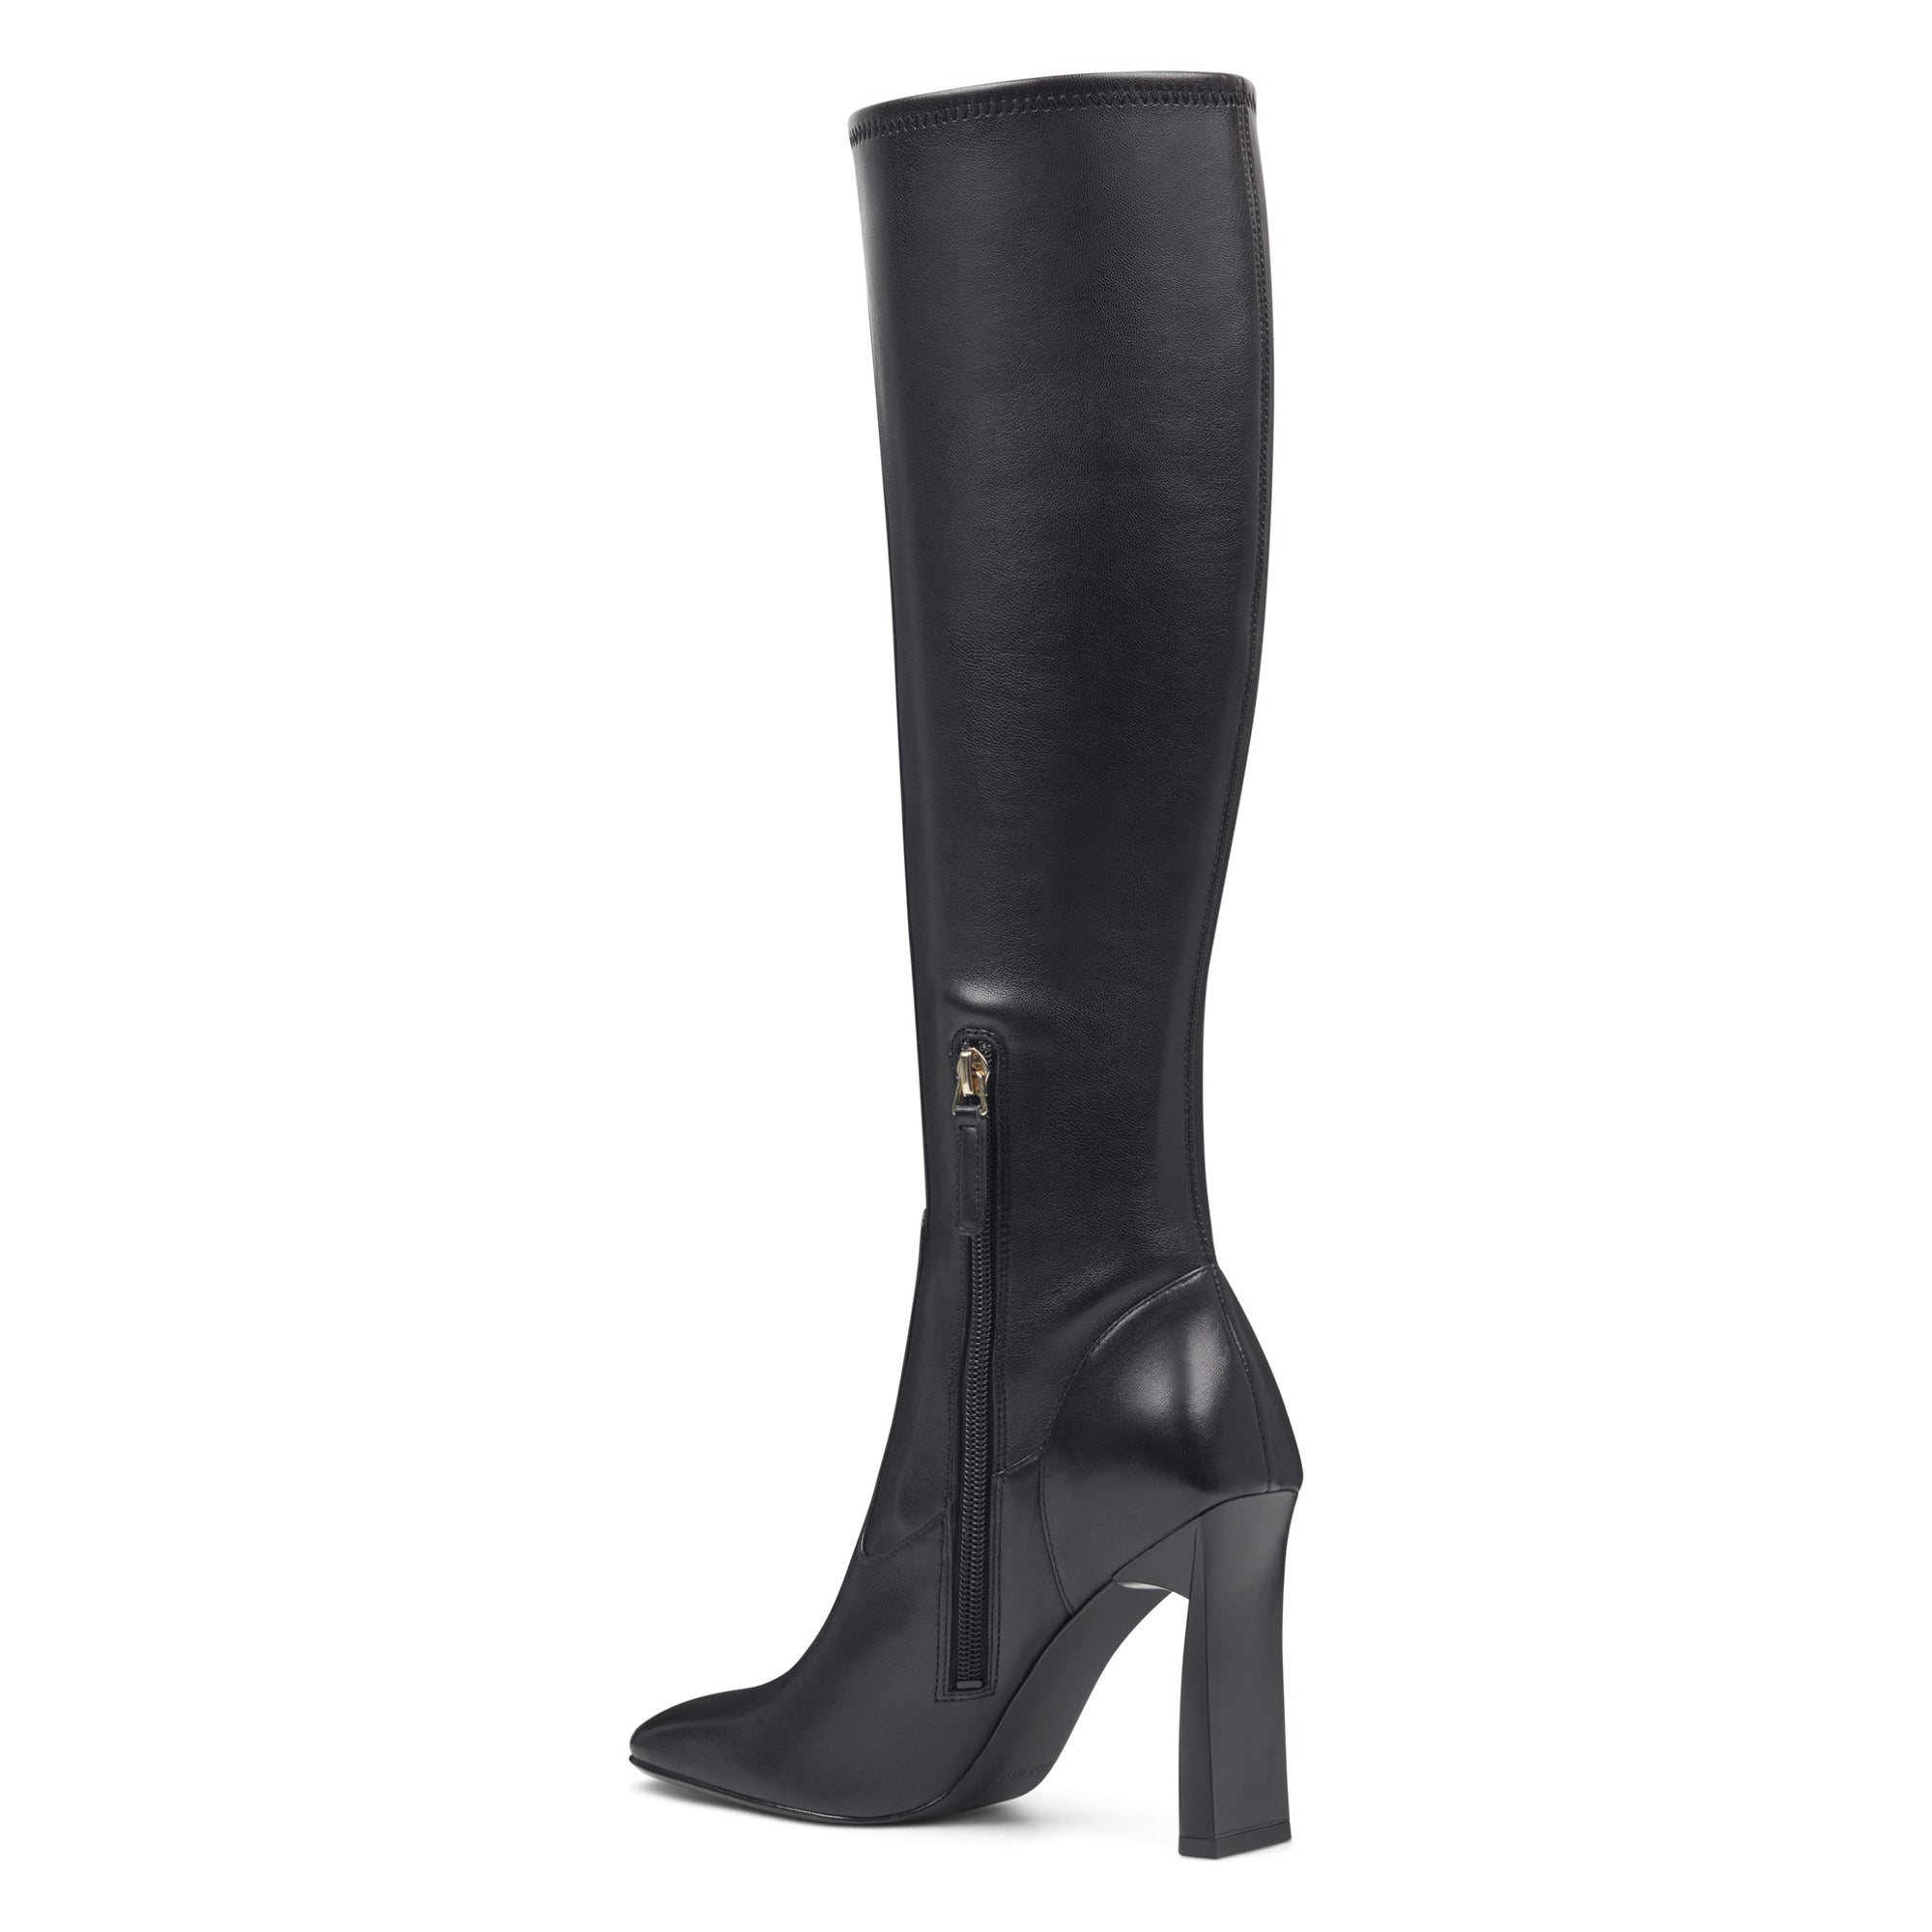 Quincy Square Toe Boots - Nine West